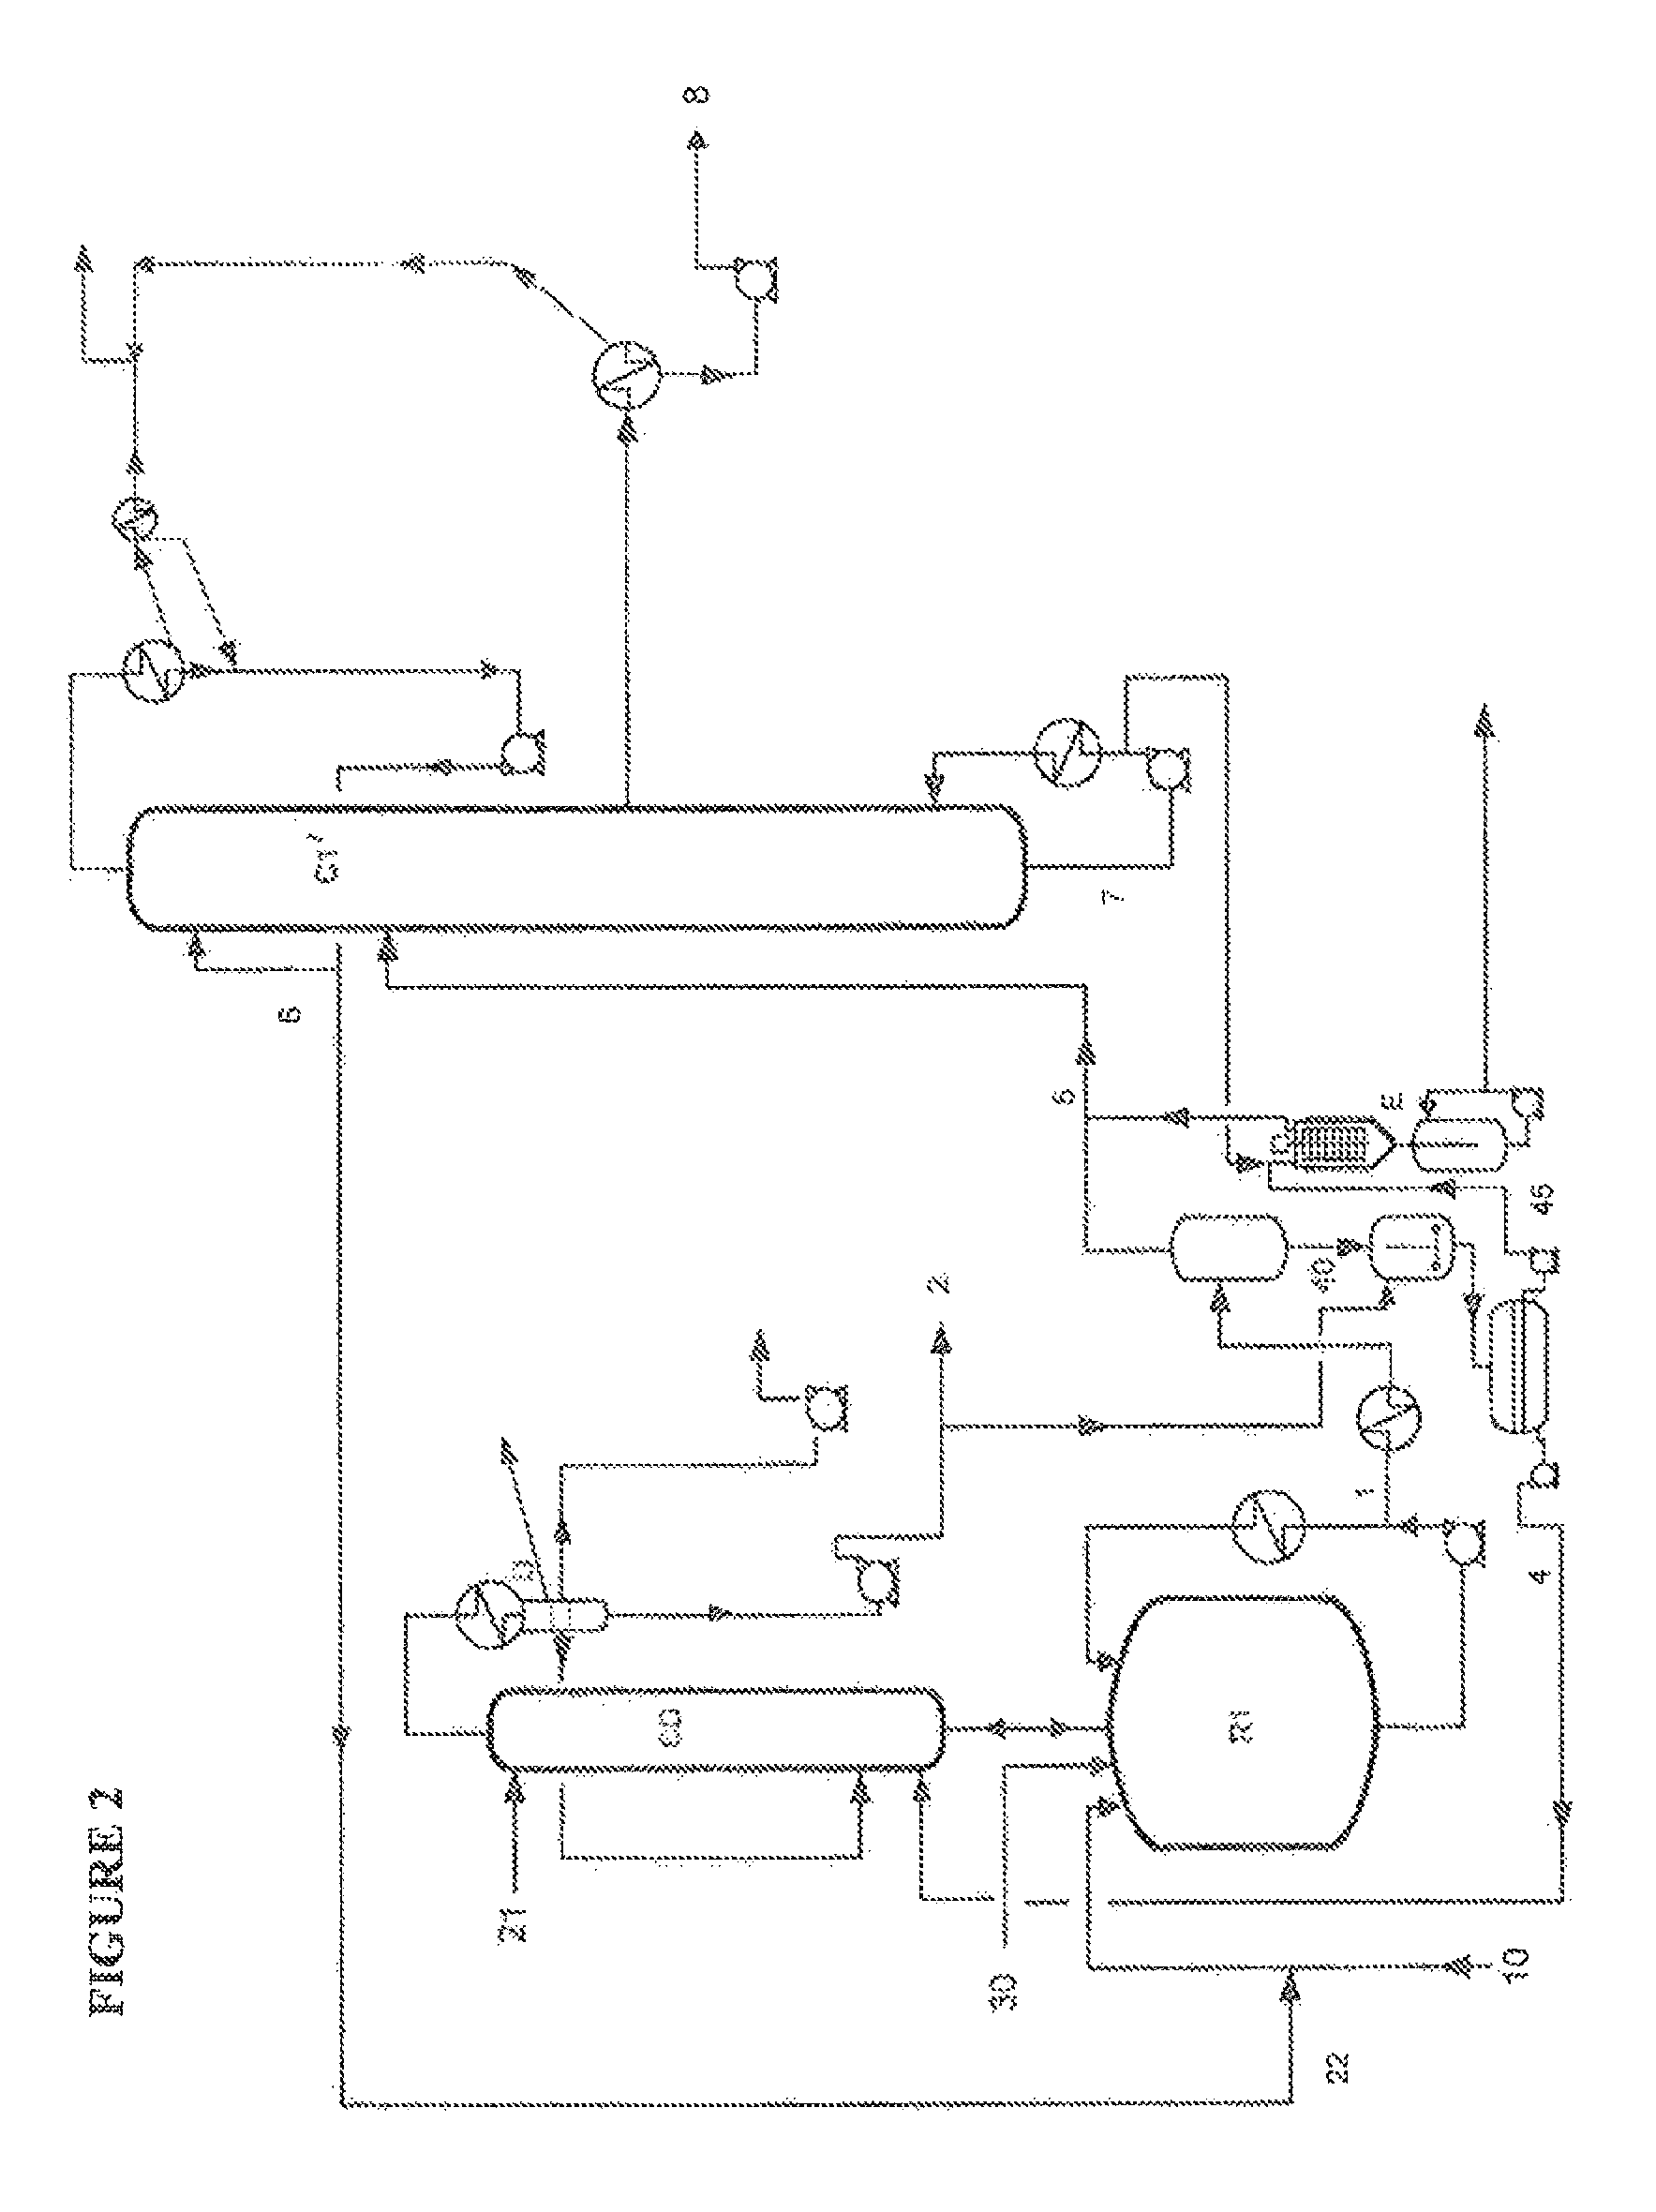 Method for producing 2-octyl acrylate by direct esterification